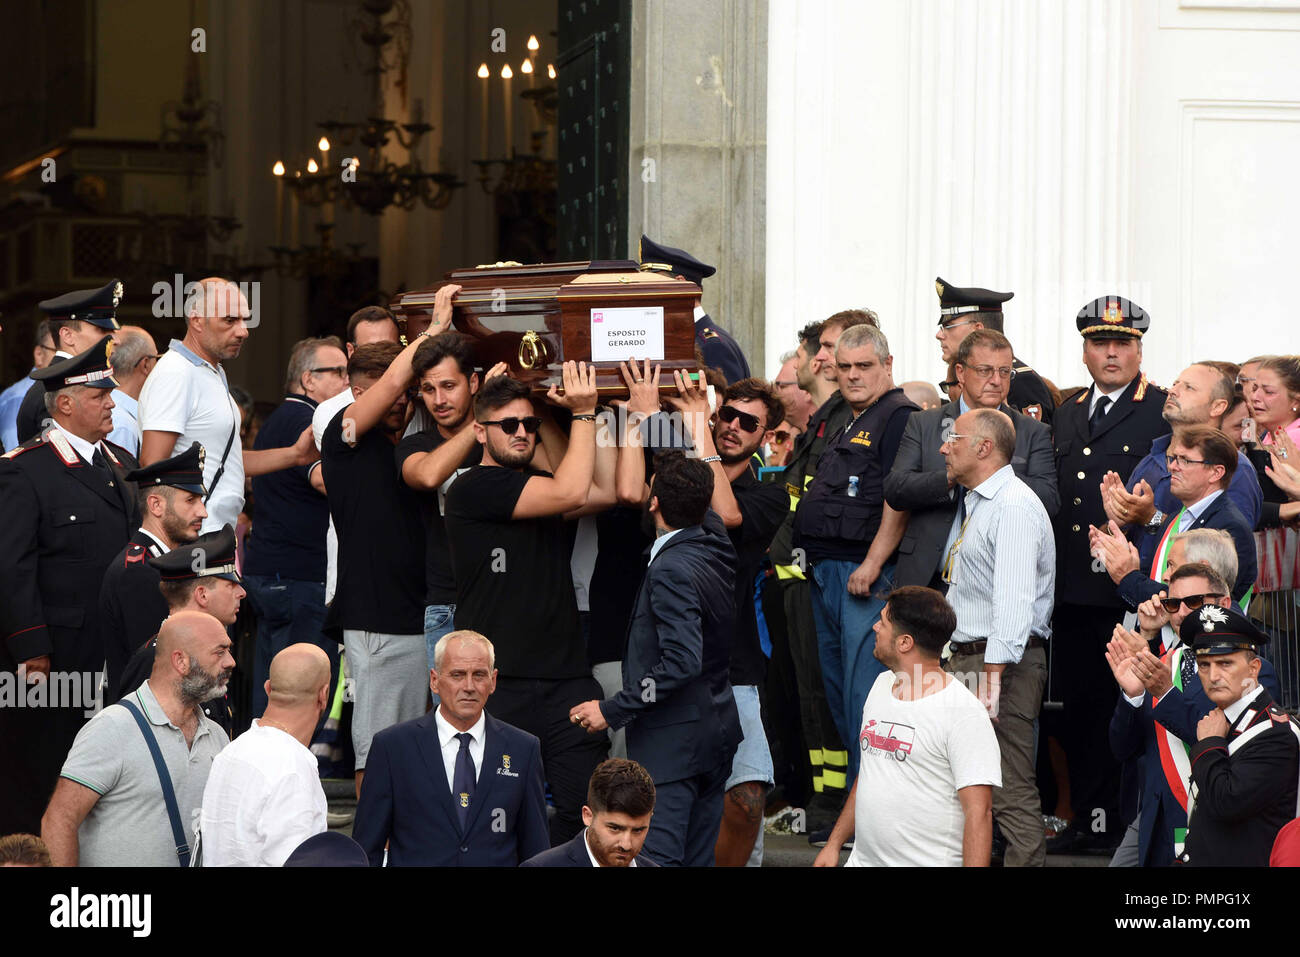 The funerals of Giovanni Battiloro, Matteo Bertonati, Gerardo Esposito and Antonio Stanzione, the four boys of Torre del Greco who died in the tragic collapse of the Morandi Bridge in Genoa on August 14, 2018. Their relatives have refused the State funeral and they decided to have their funerals in Torre del Greco, Italy.  Featuring: atmosphere Where: Torre del Greco, Campania, Italy When: 17 Aug 2018 Credit: IPA/WENN.com  **Only available for publication in UK, USA, Germany, Austria, Switzerland** Stock Photo